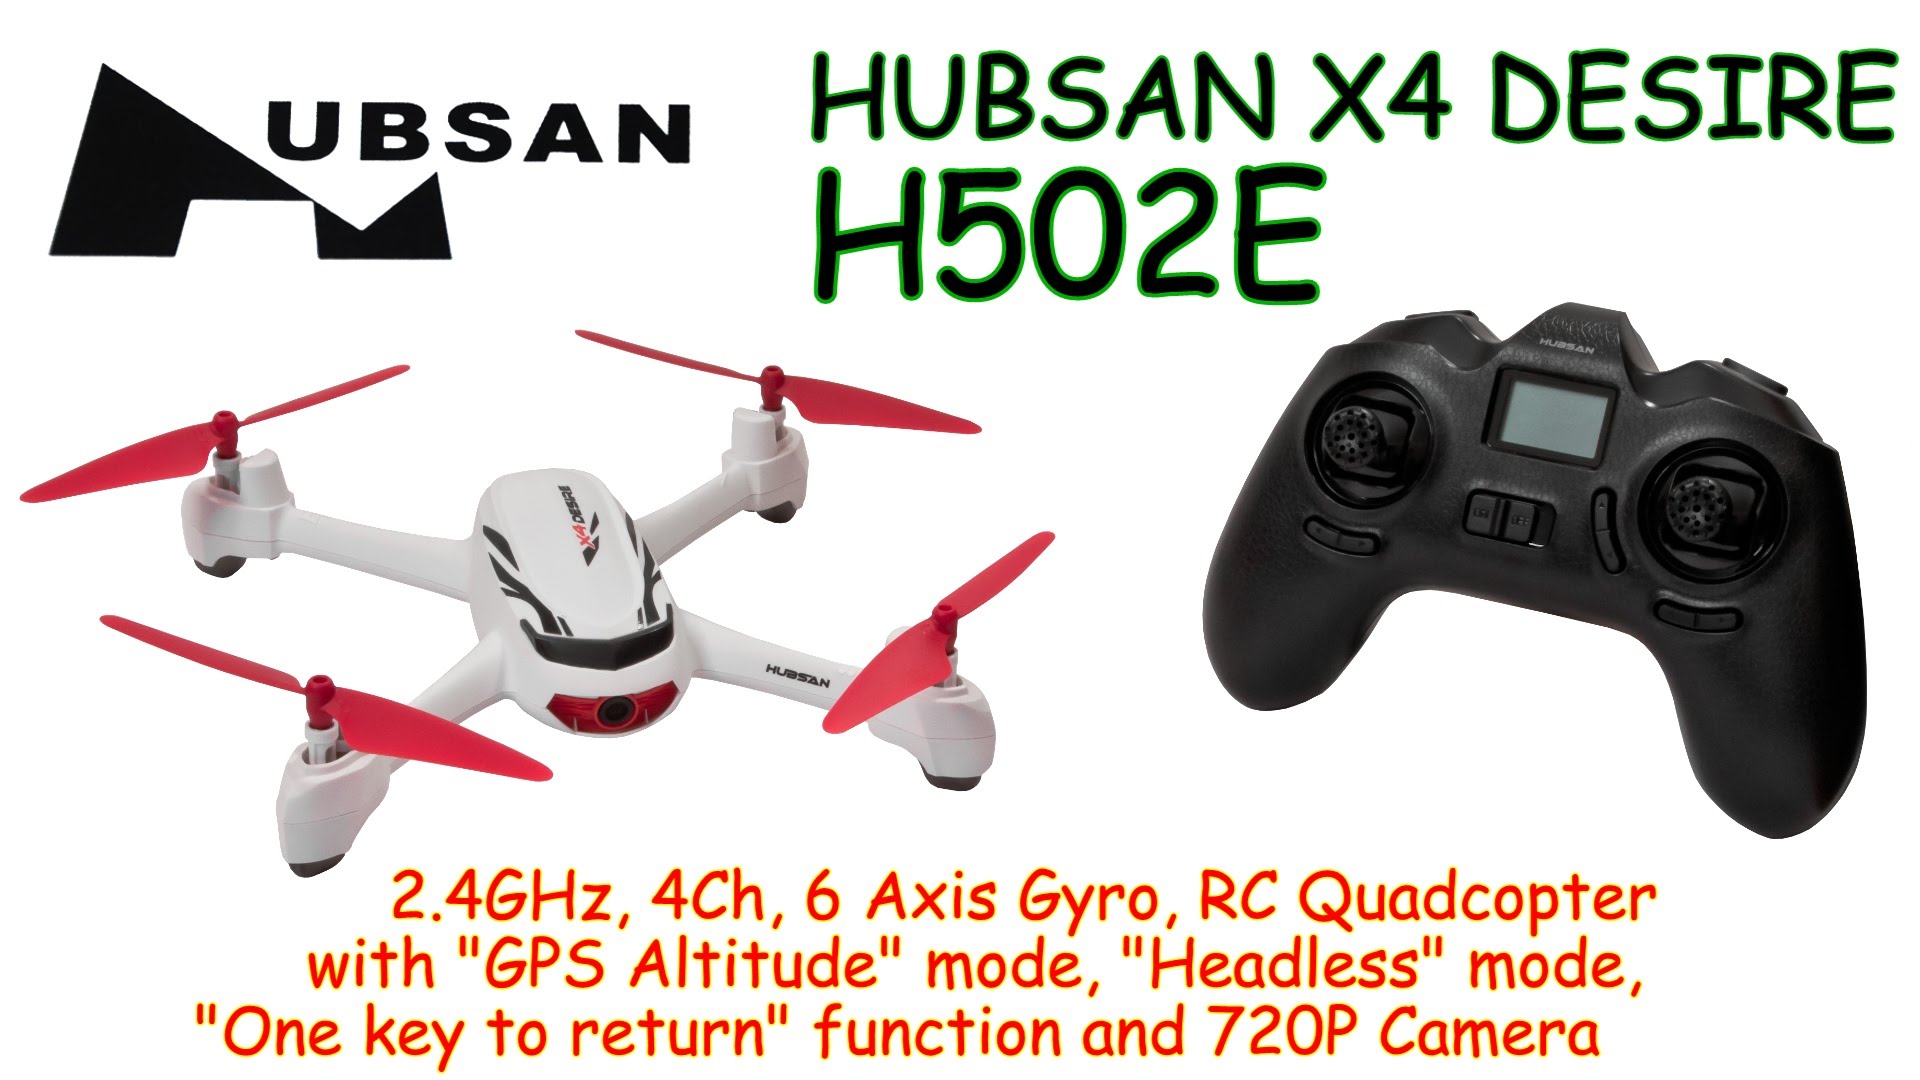 Hubsan X4 H502E 2.4GHz, 4Ch, 6 Axis, RC Quadcopter with GPS Altitude, Headless and 720P camera (RTF)